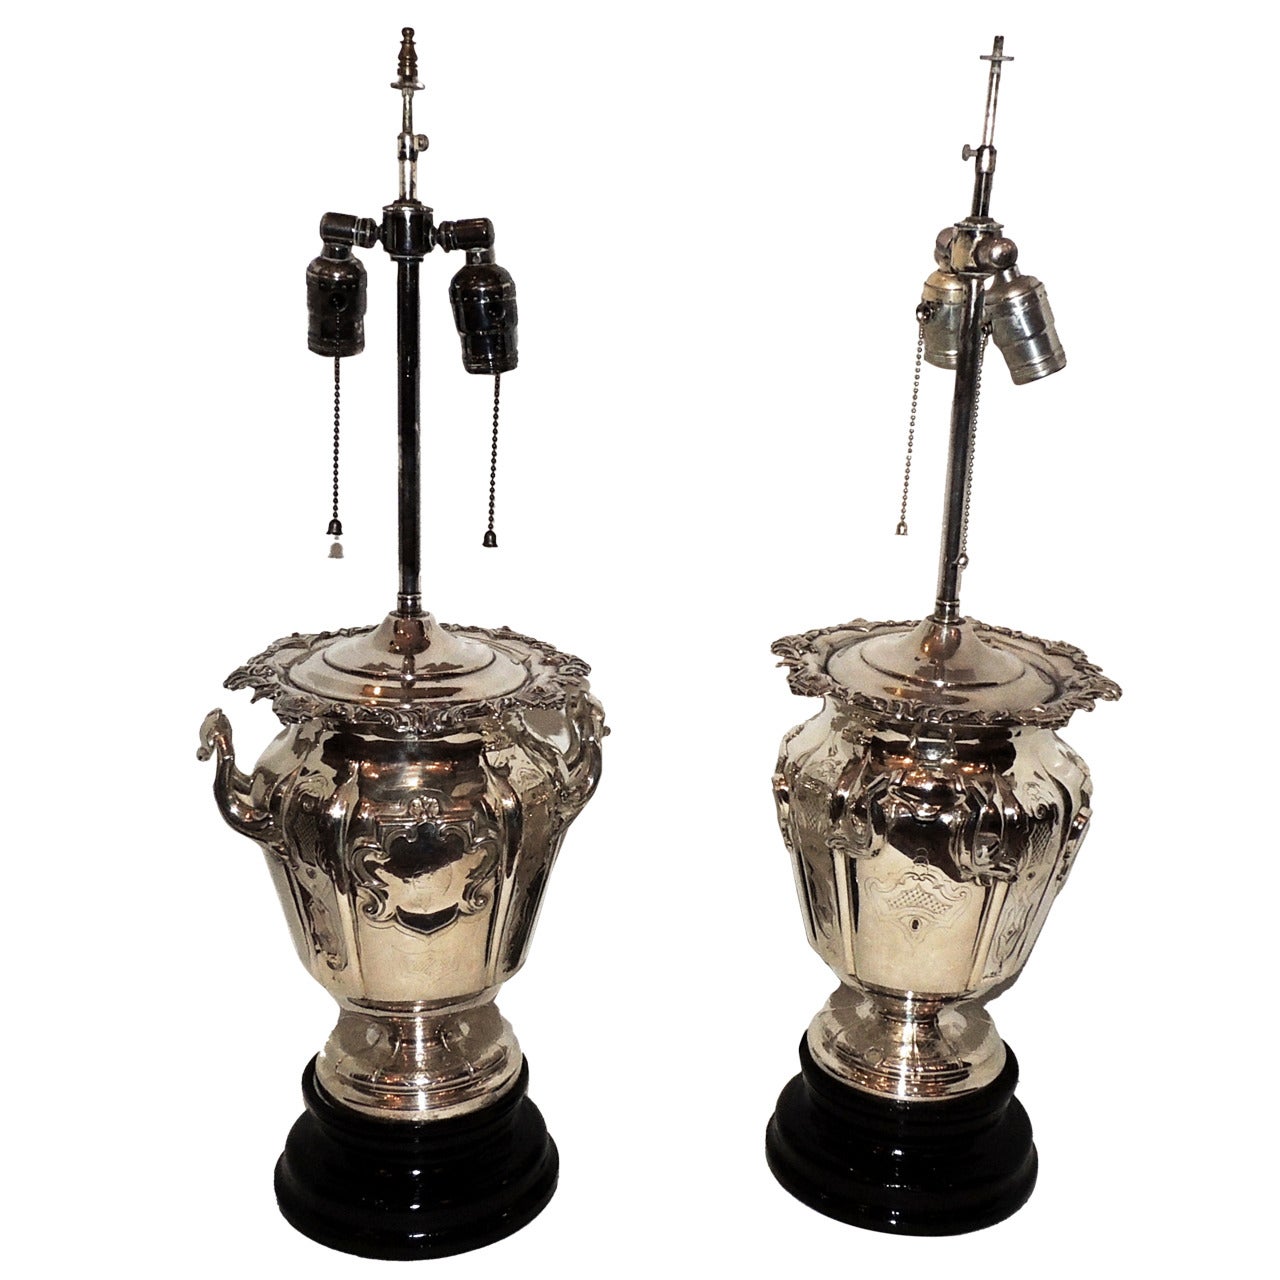 Exceptional Pair of English Silver Plated Champagne Ice Bucket Lamps, Unique